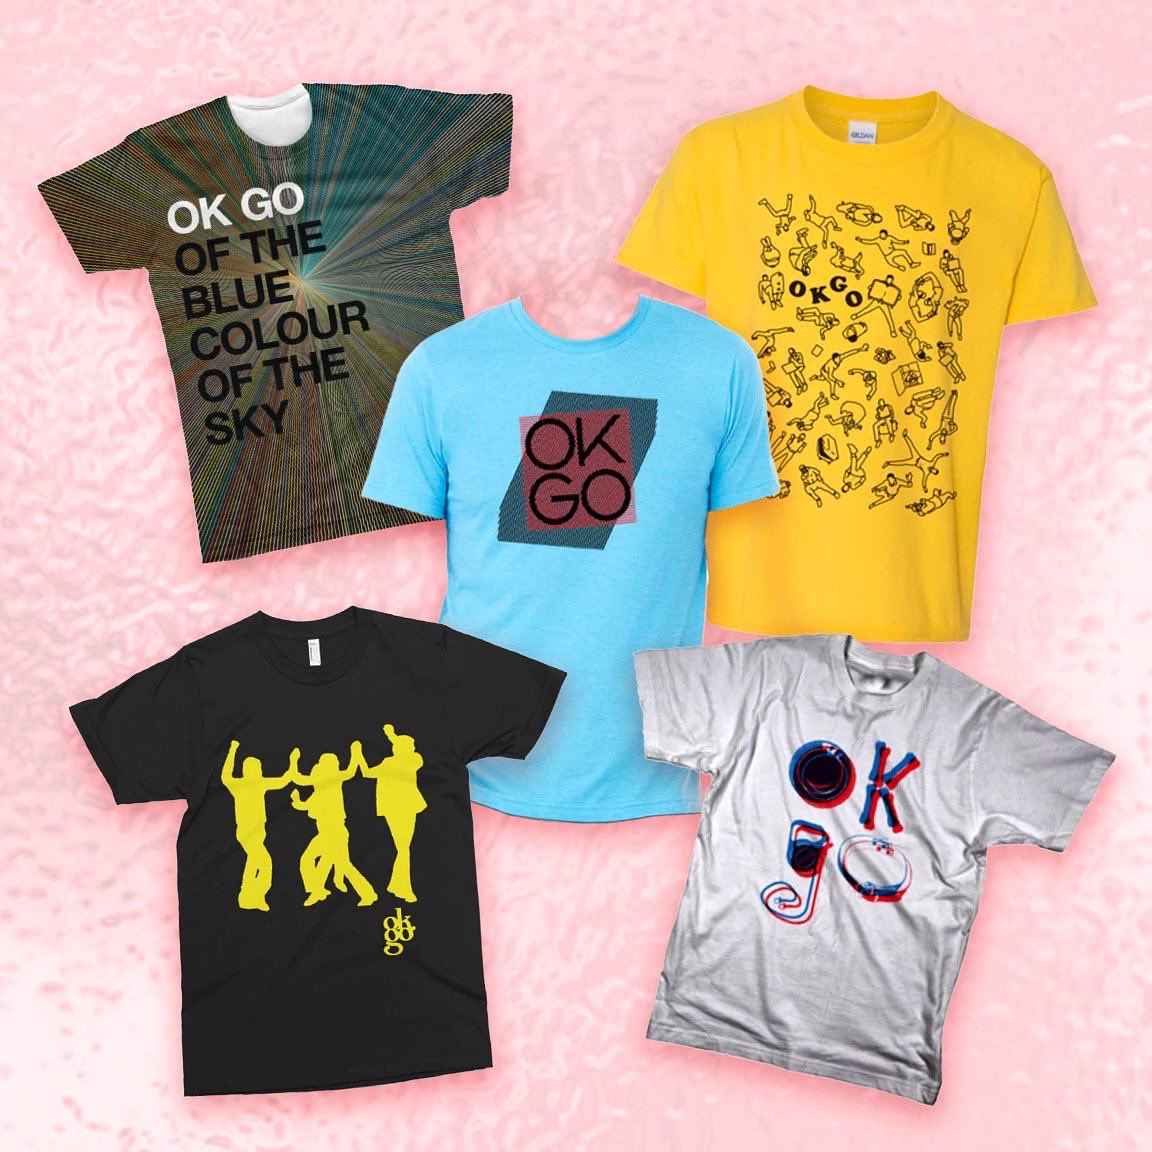 OK Go on X: We are sold out of all vinyl products! We still have a ton of  t-shirts, mugs, bags & more available for our spring sale where everything  will be